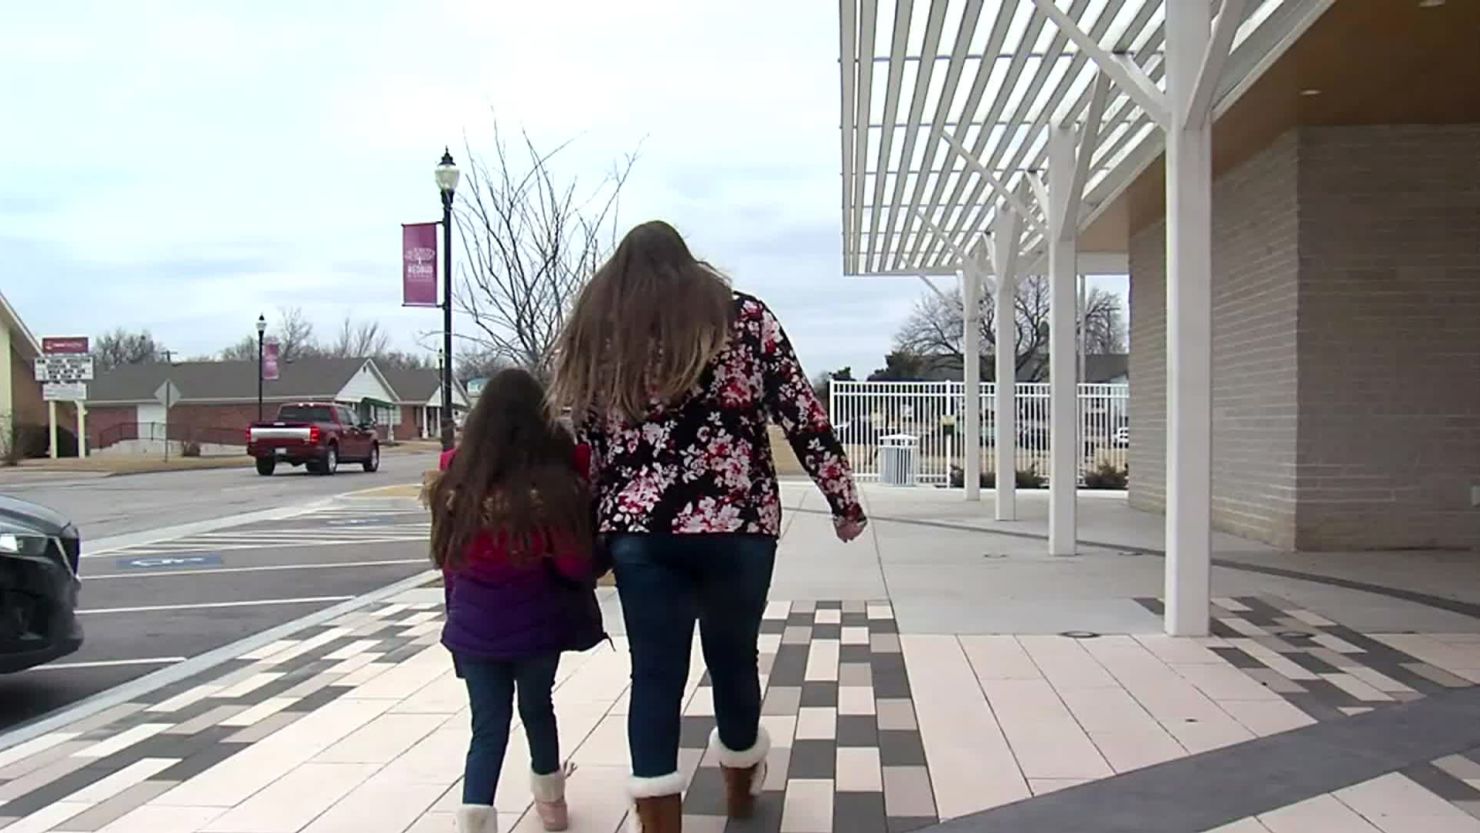 Second grader Chloe Shelton and her mom Delanie Shelton hold hands while they walk together. Chloe was kicked out of school after saying she had a crush on another girl.